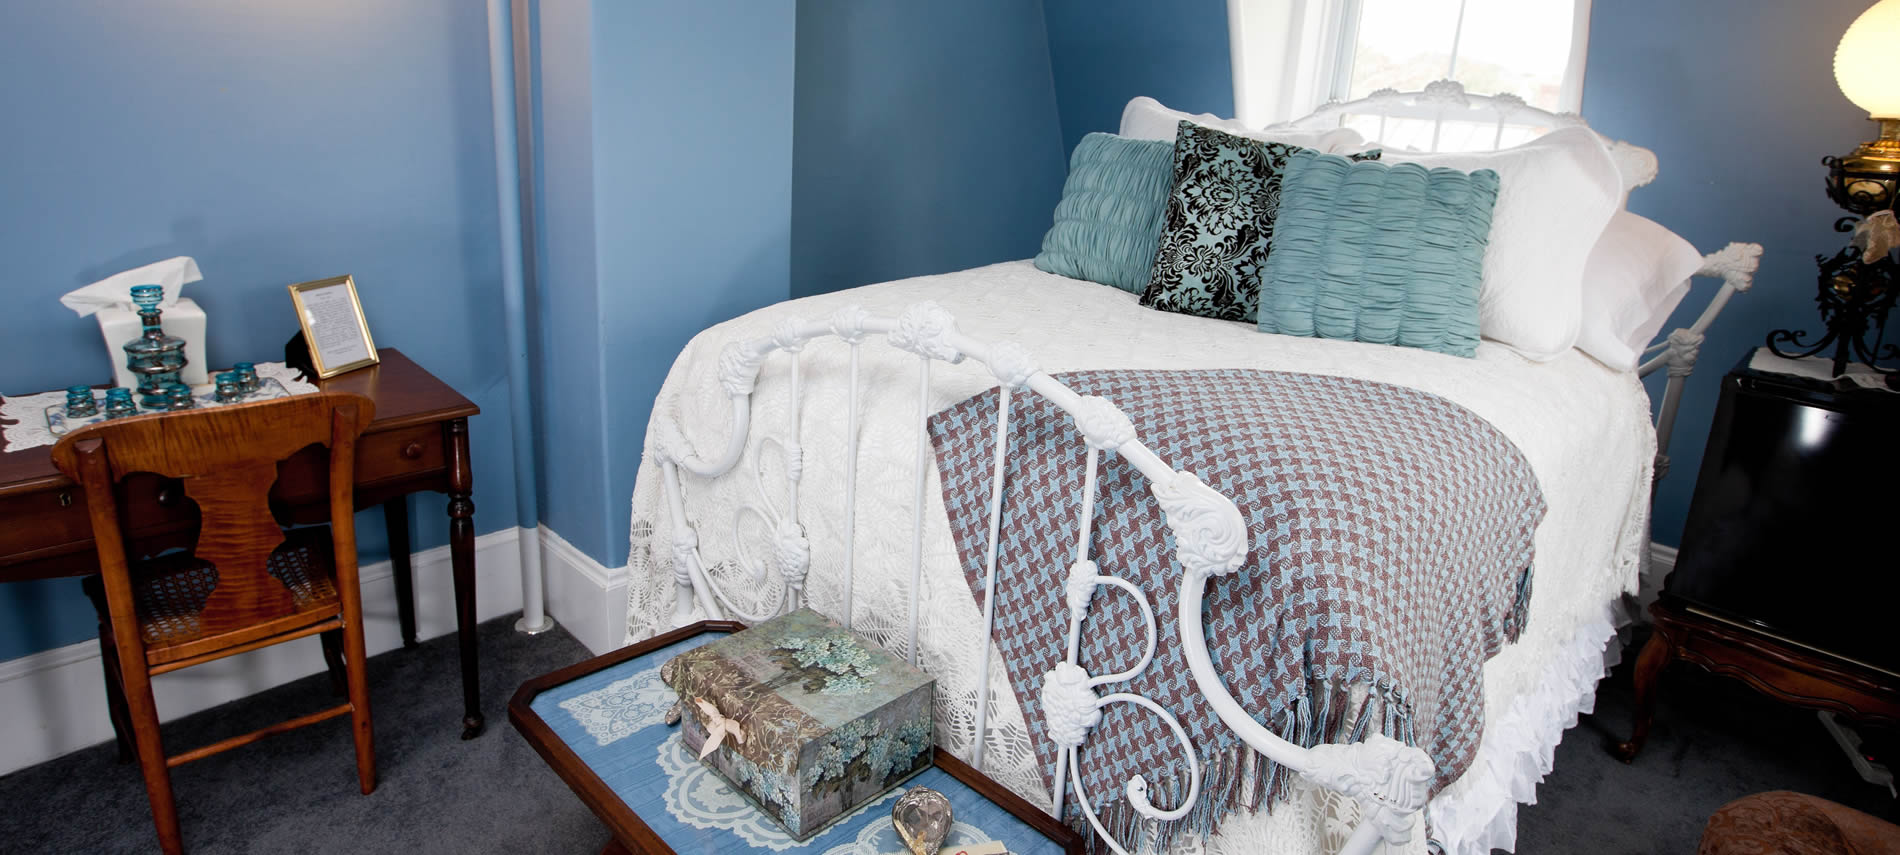 Princess Victoria guest room bed, blue walls, white bedding, blue pillows and writing desk